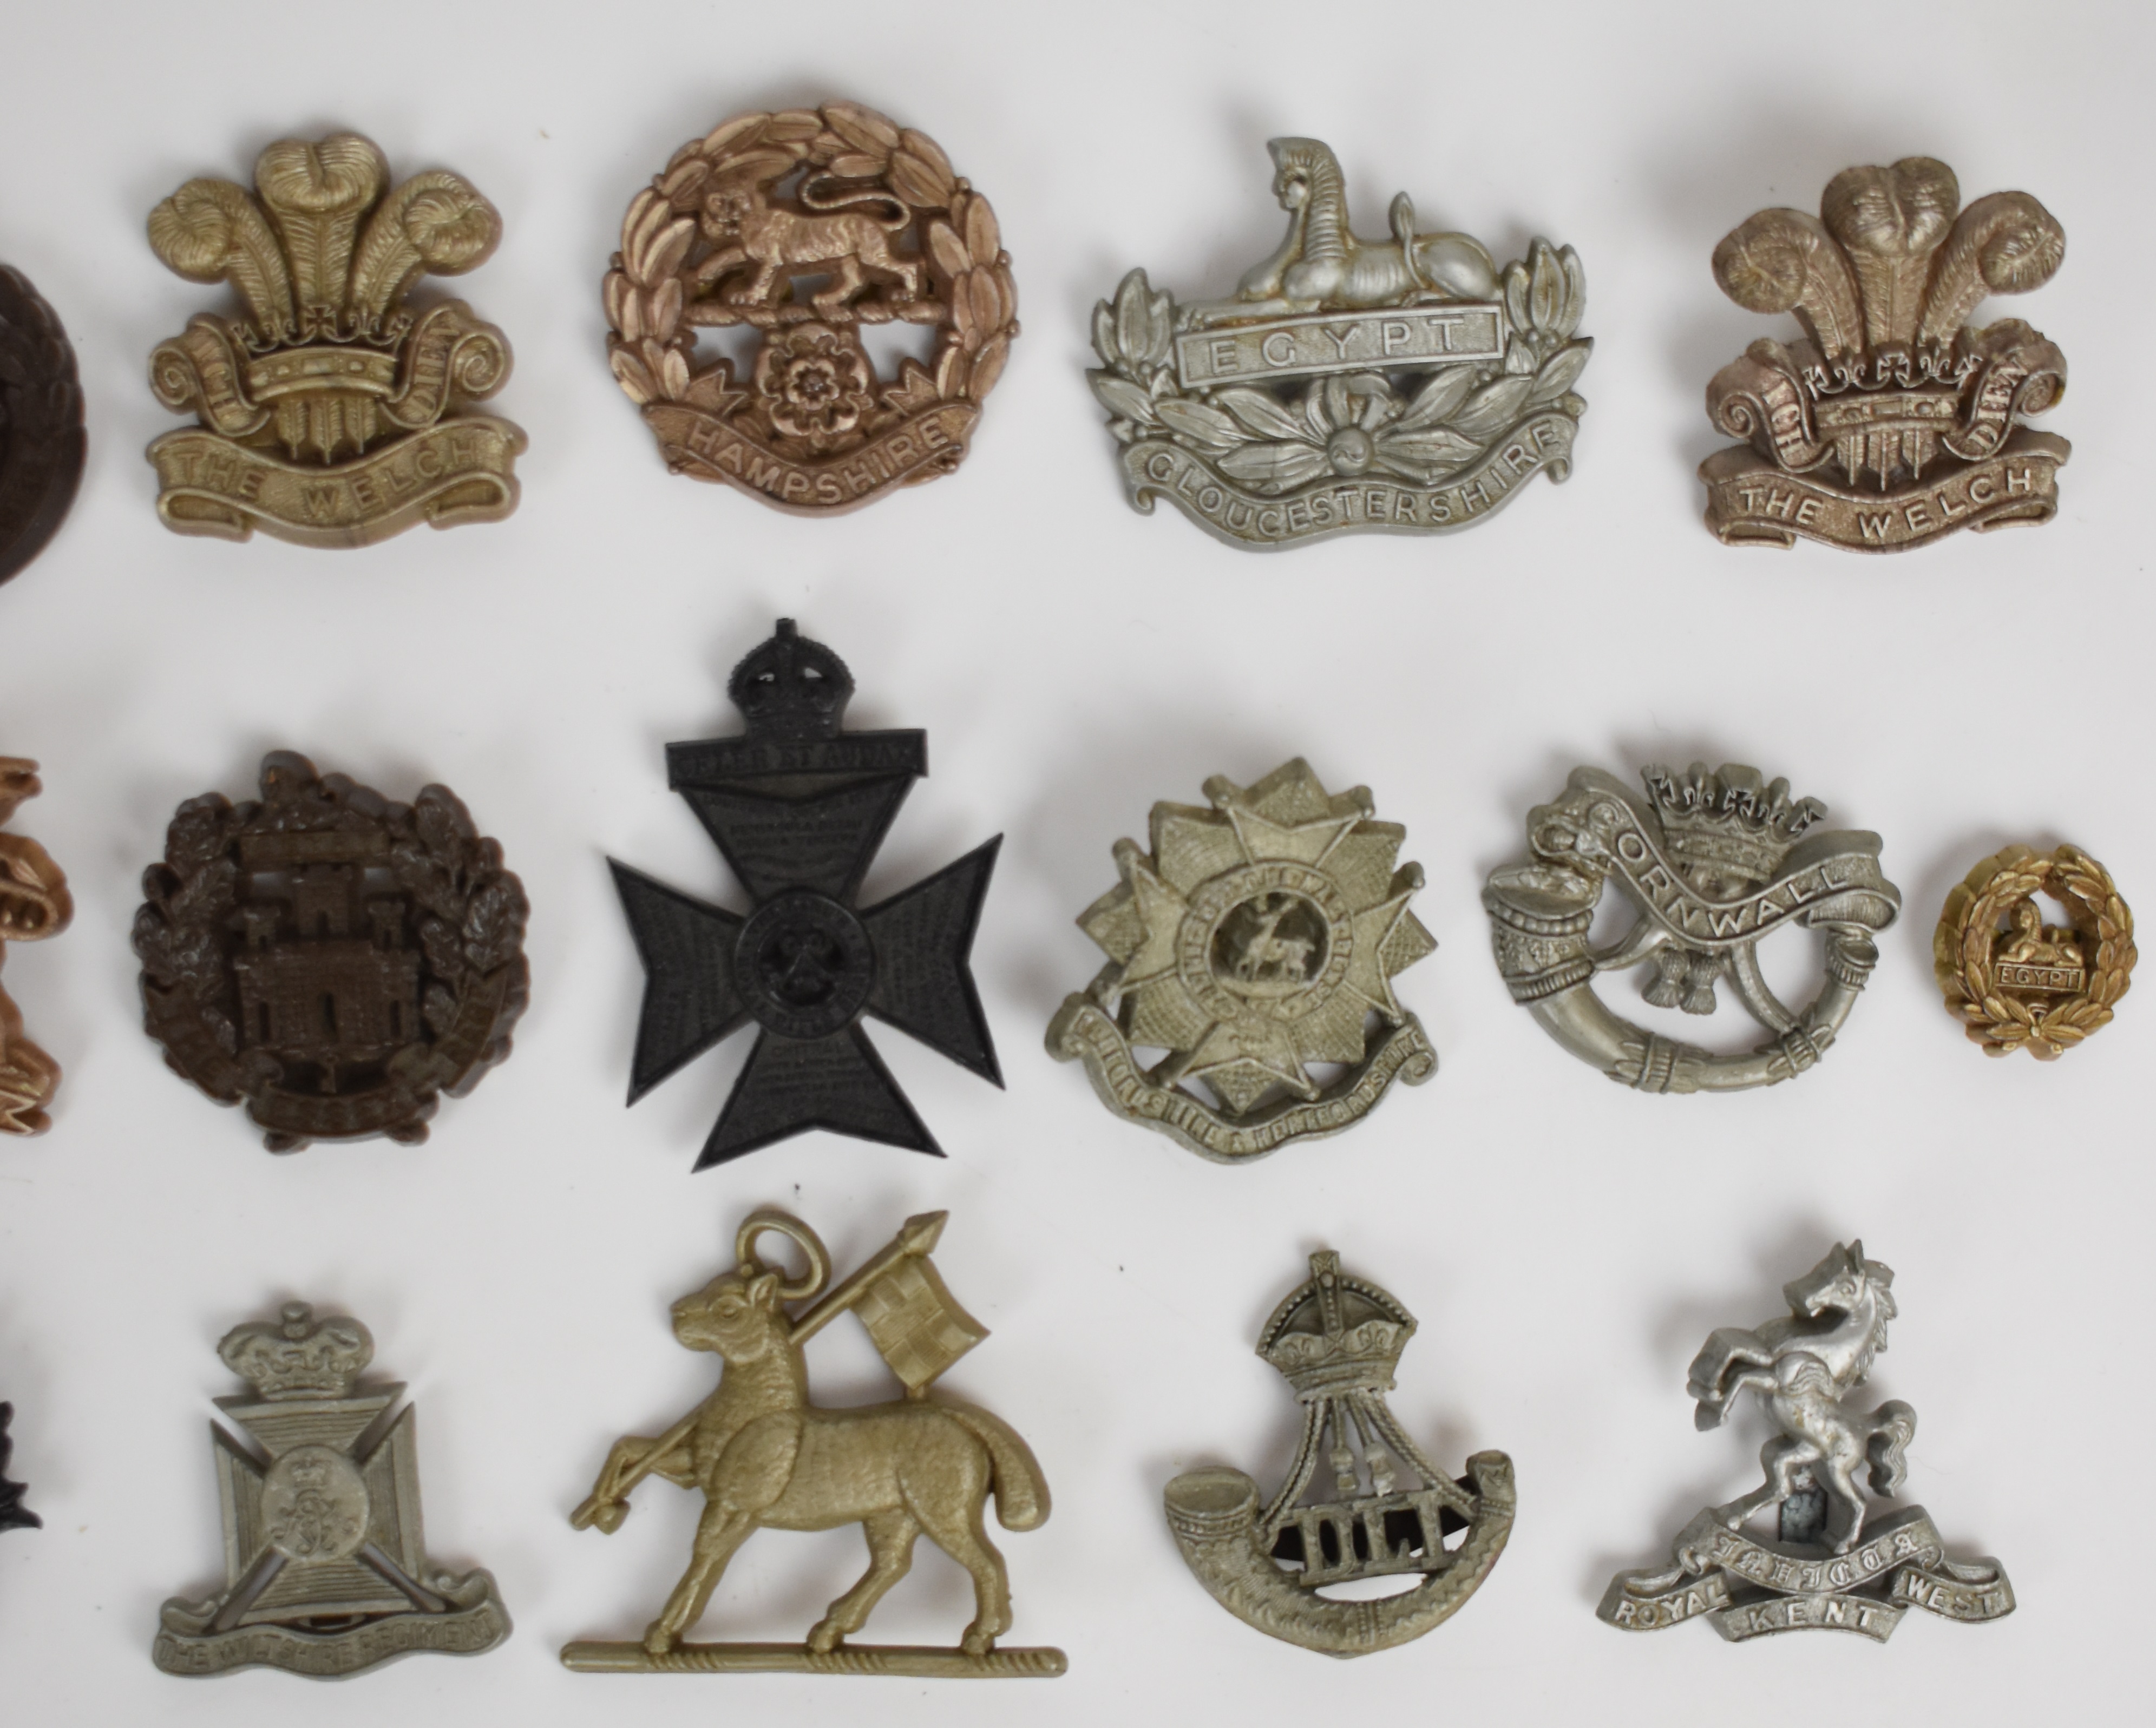 Twenty British Army plastic economy badges including West Yorkshire Regiment with F & G to - Image 7 of 8